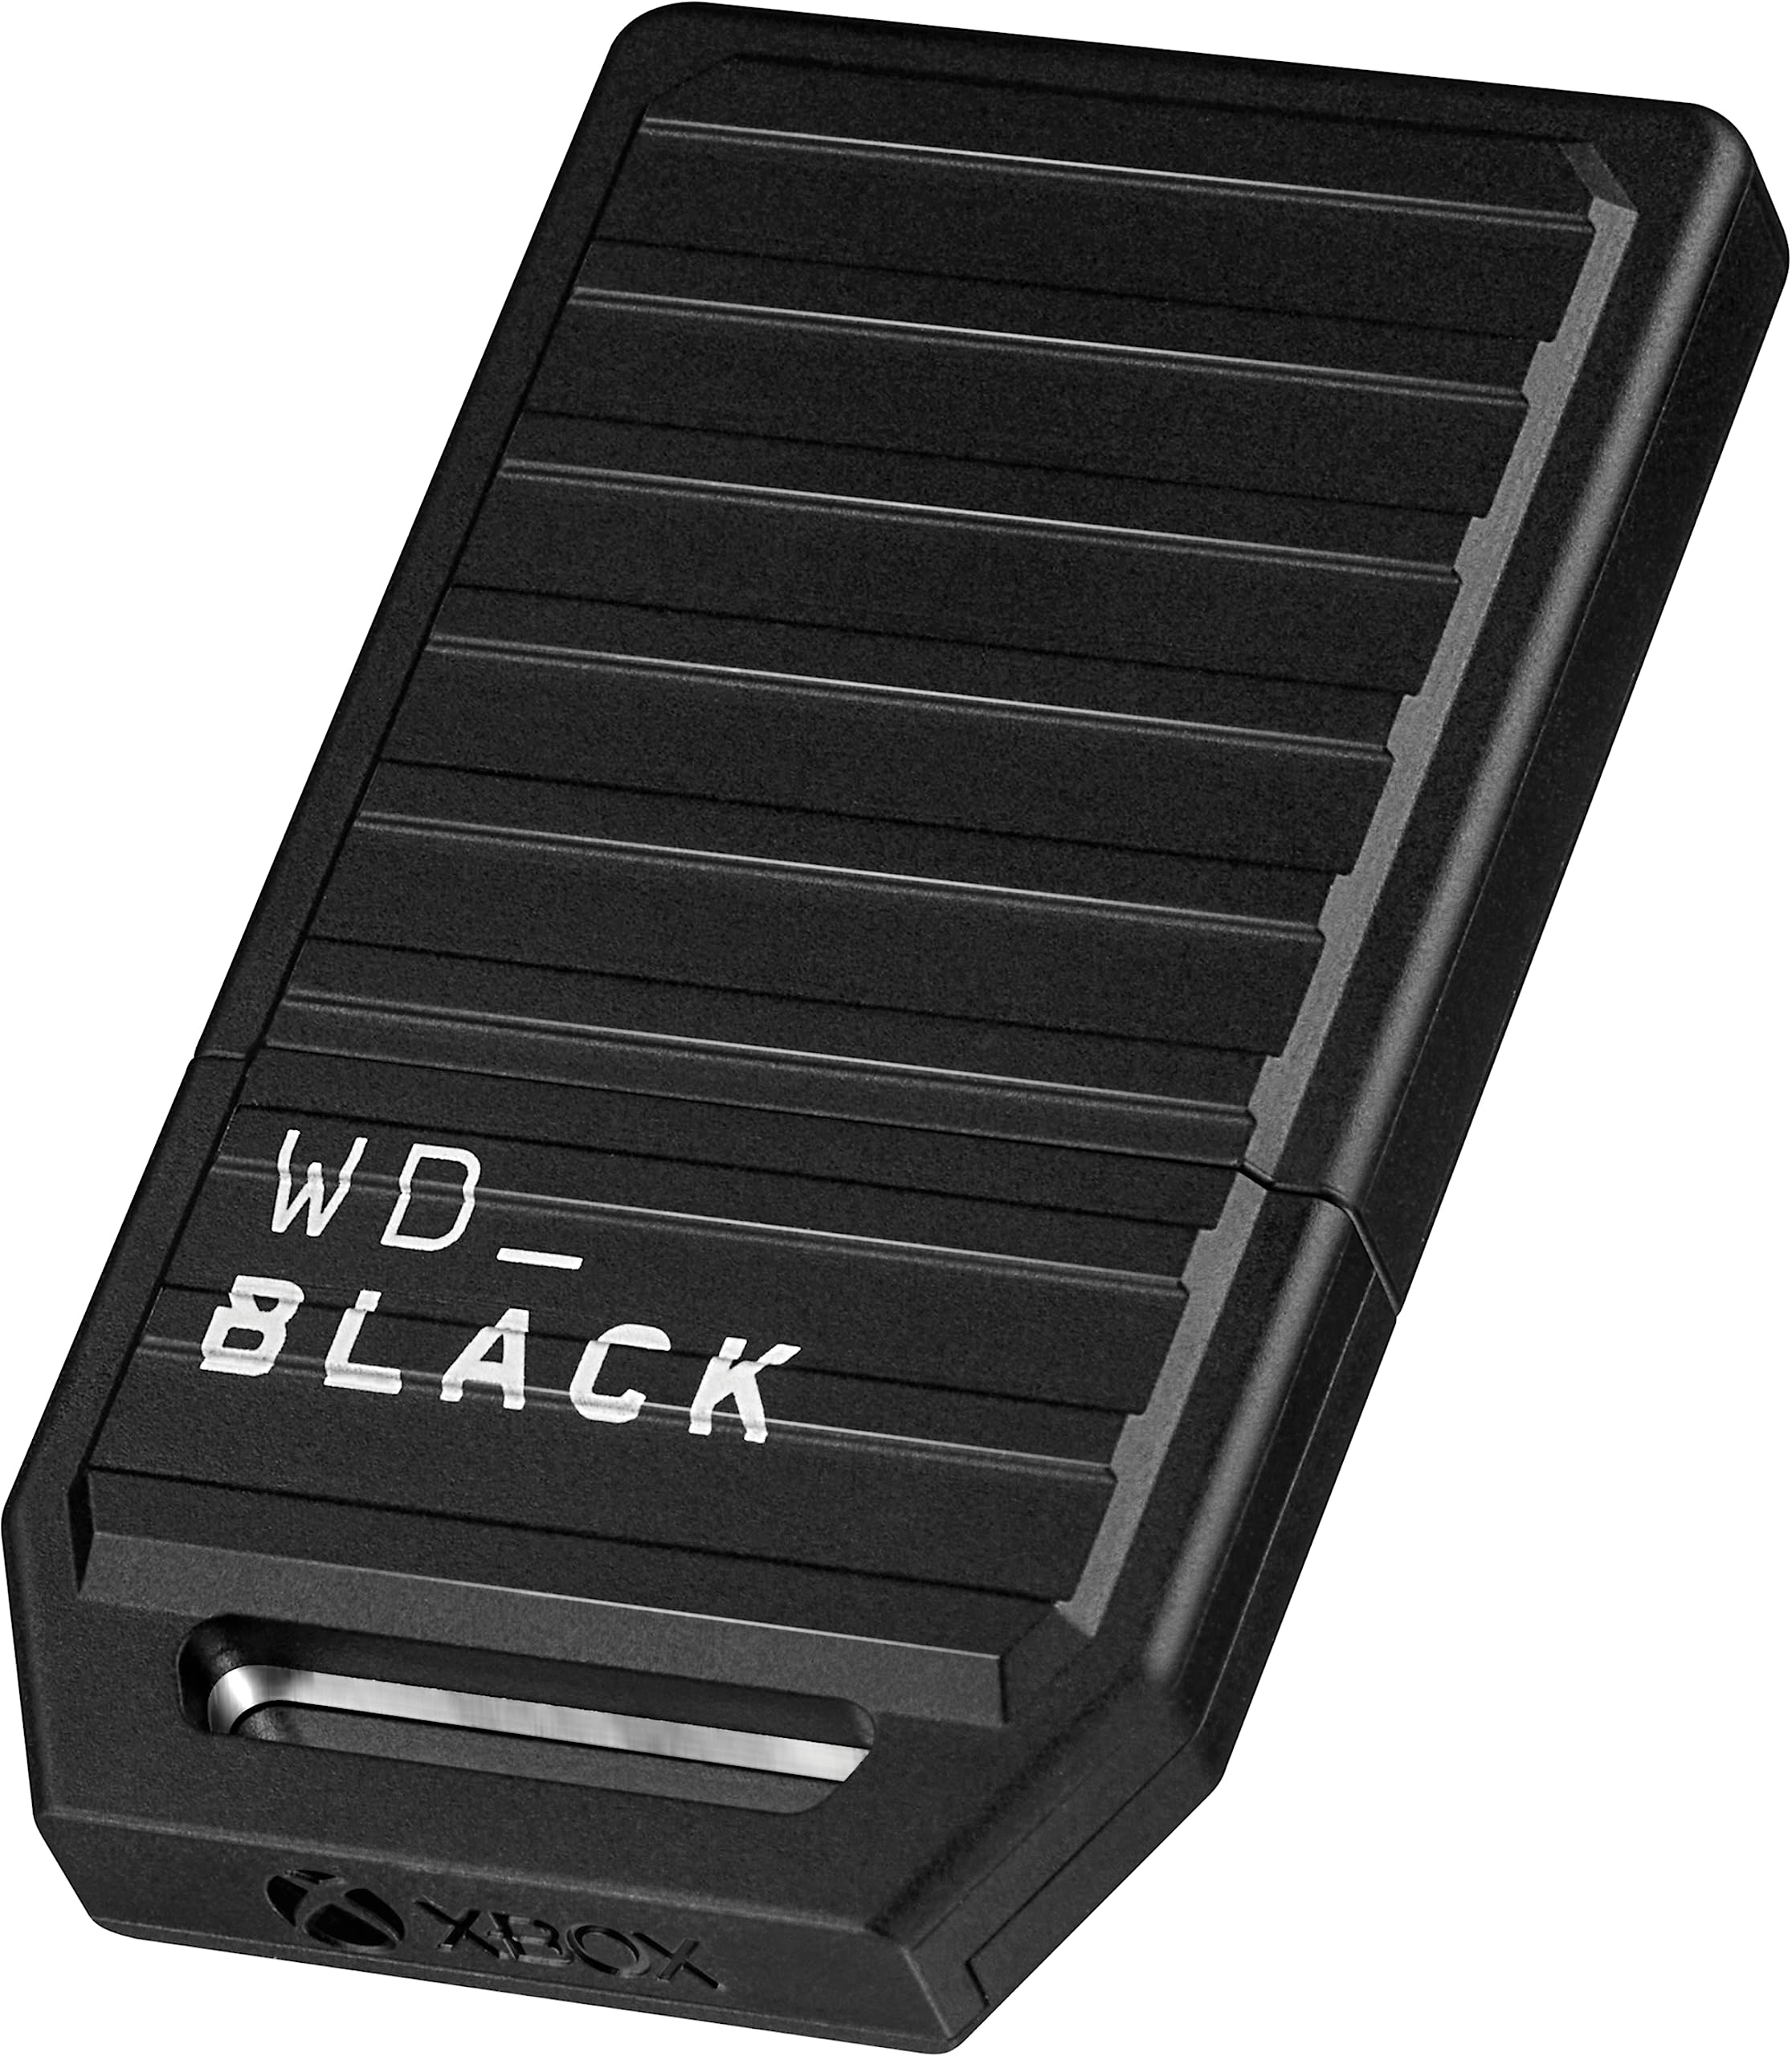 WD_BLACK 512GB C50 Storage Expansion Card for Xbox Series X|S - Quick Resume - Plug & Play - Solid State Drive - WDBMPH5120ANC-WCSN